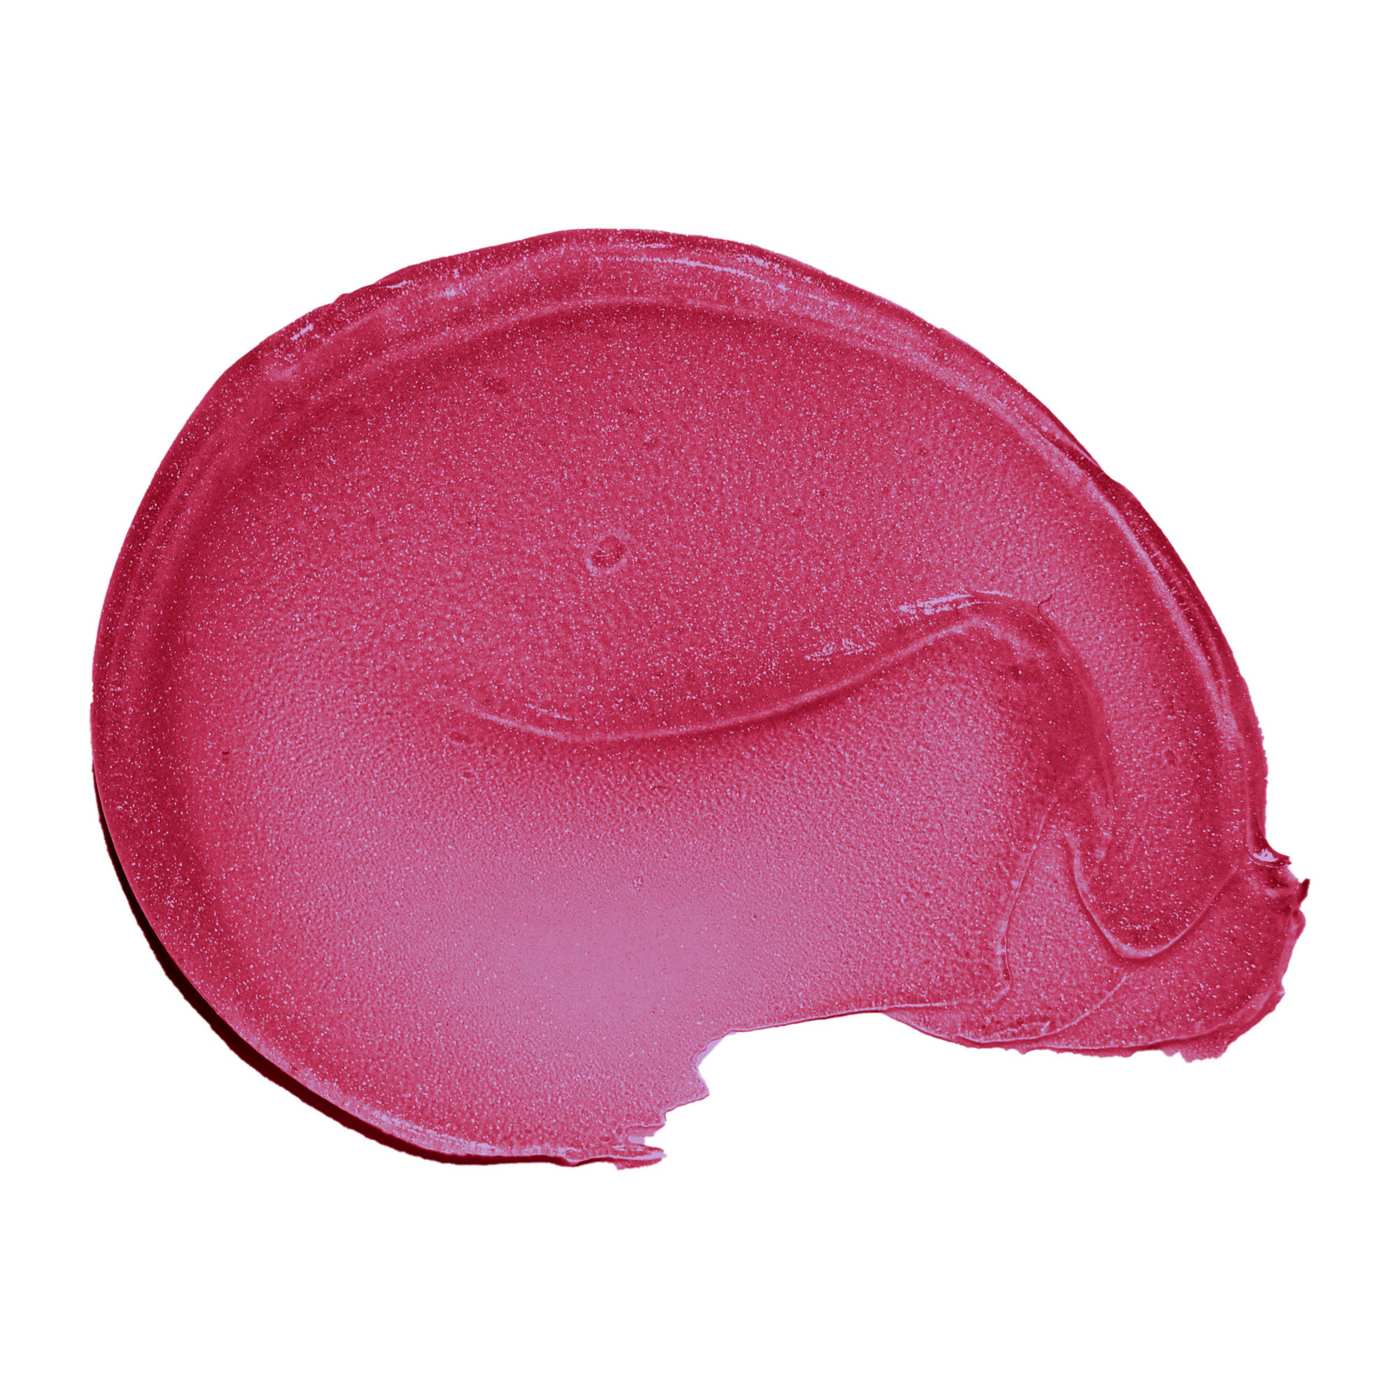 Physicians Formula Diamond Plumper Mineral Wear Berry; image 2 of 6